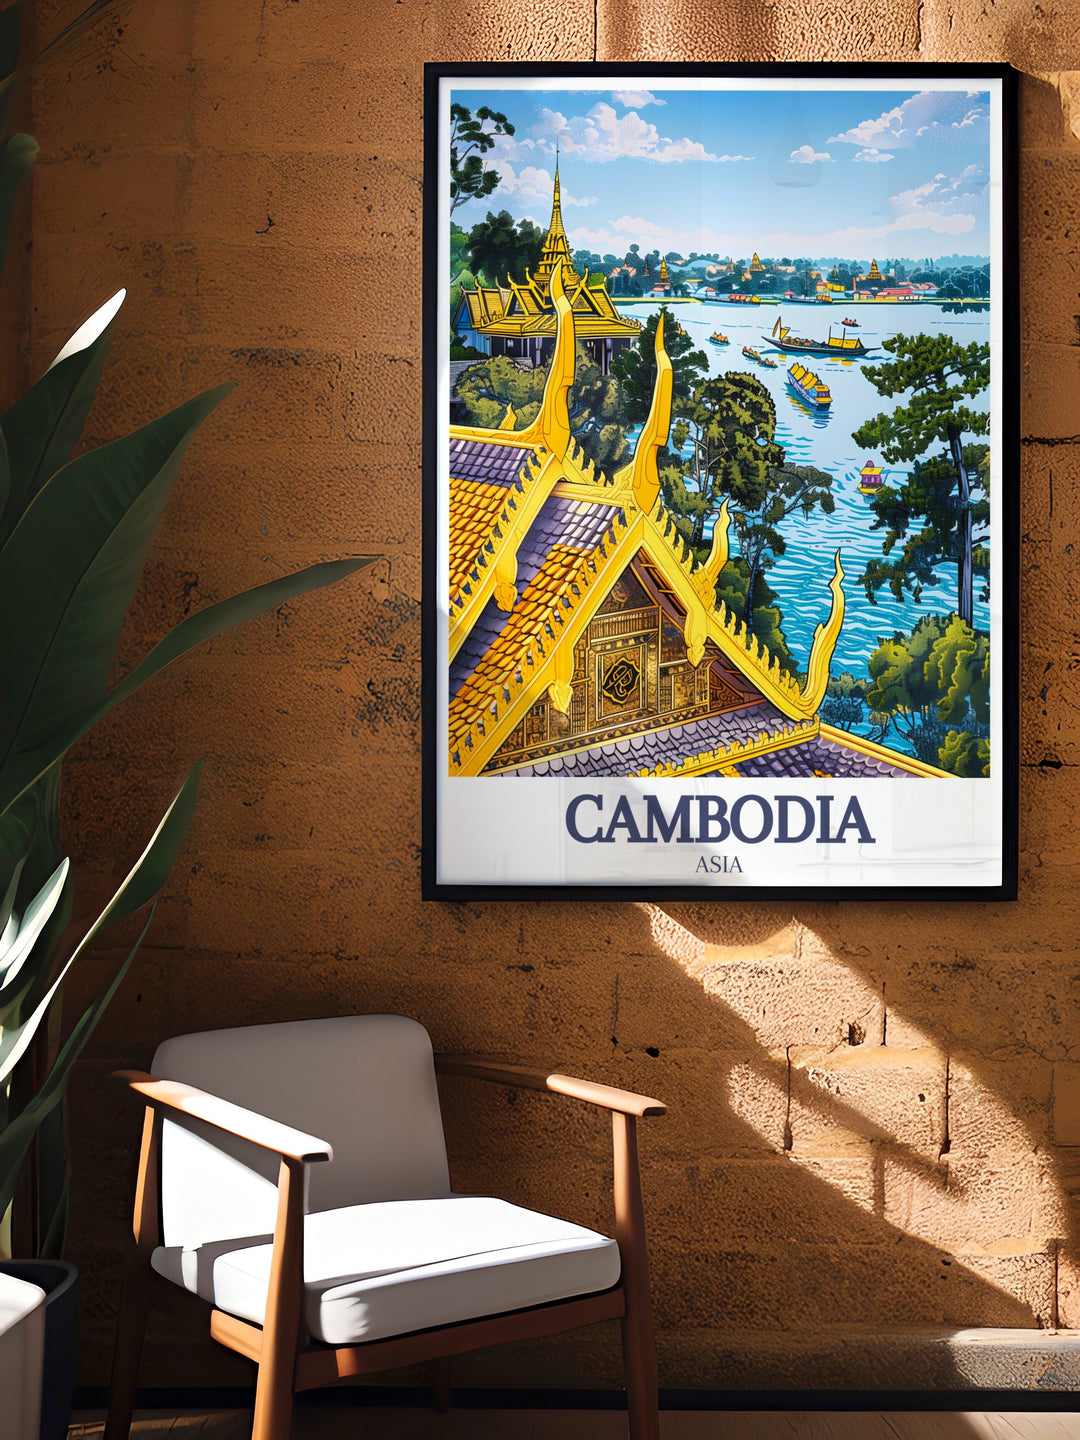 Bring the splendor of Royal Palace, Phnom Penh, Tonle Sap Lake into your home with this beautiful poster. Showcasing the famous Cambodian landmarks, this piece is ideal for highlighting the rich cultural heritage and natural beauty of the region.